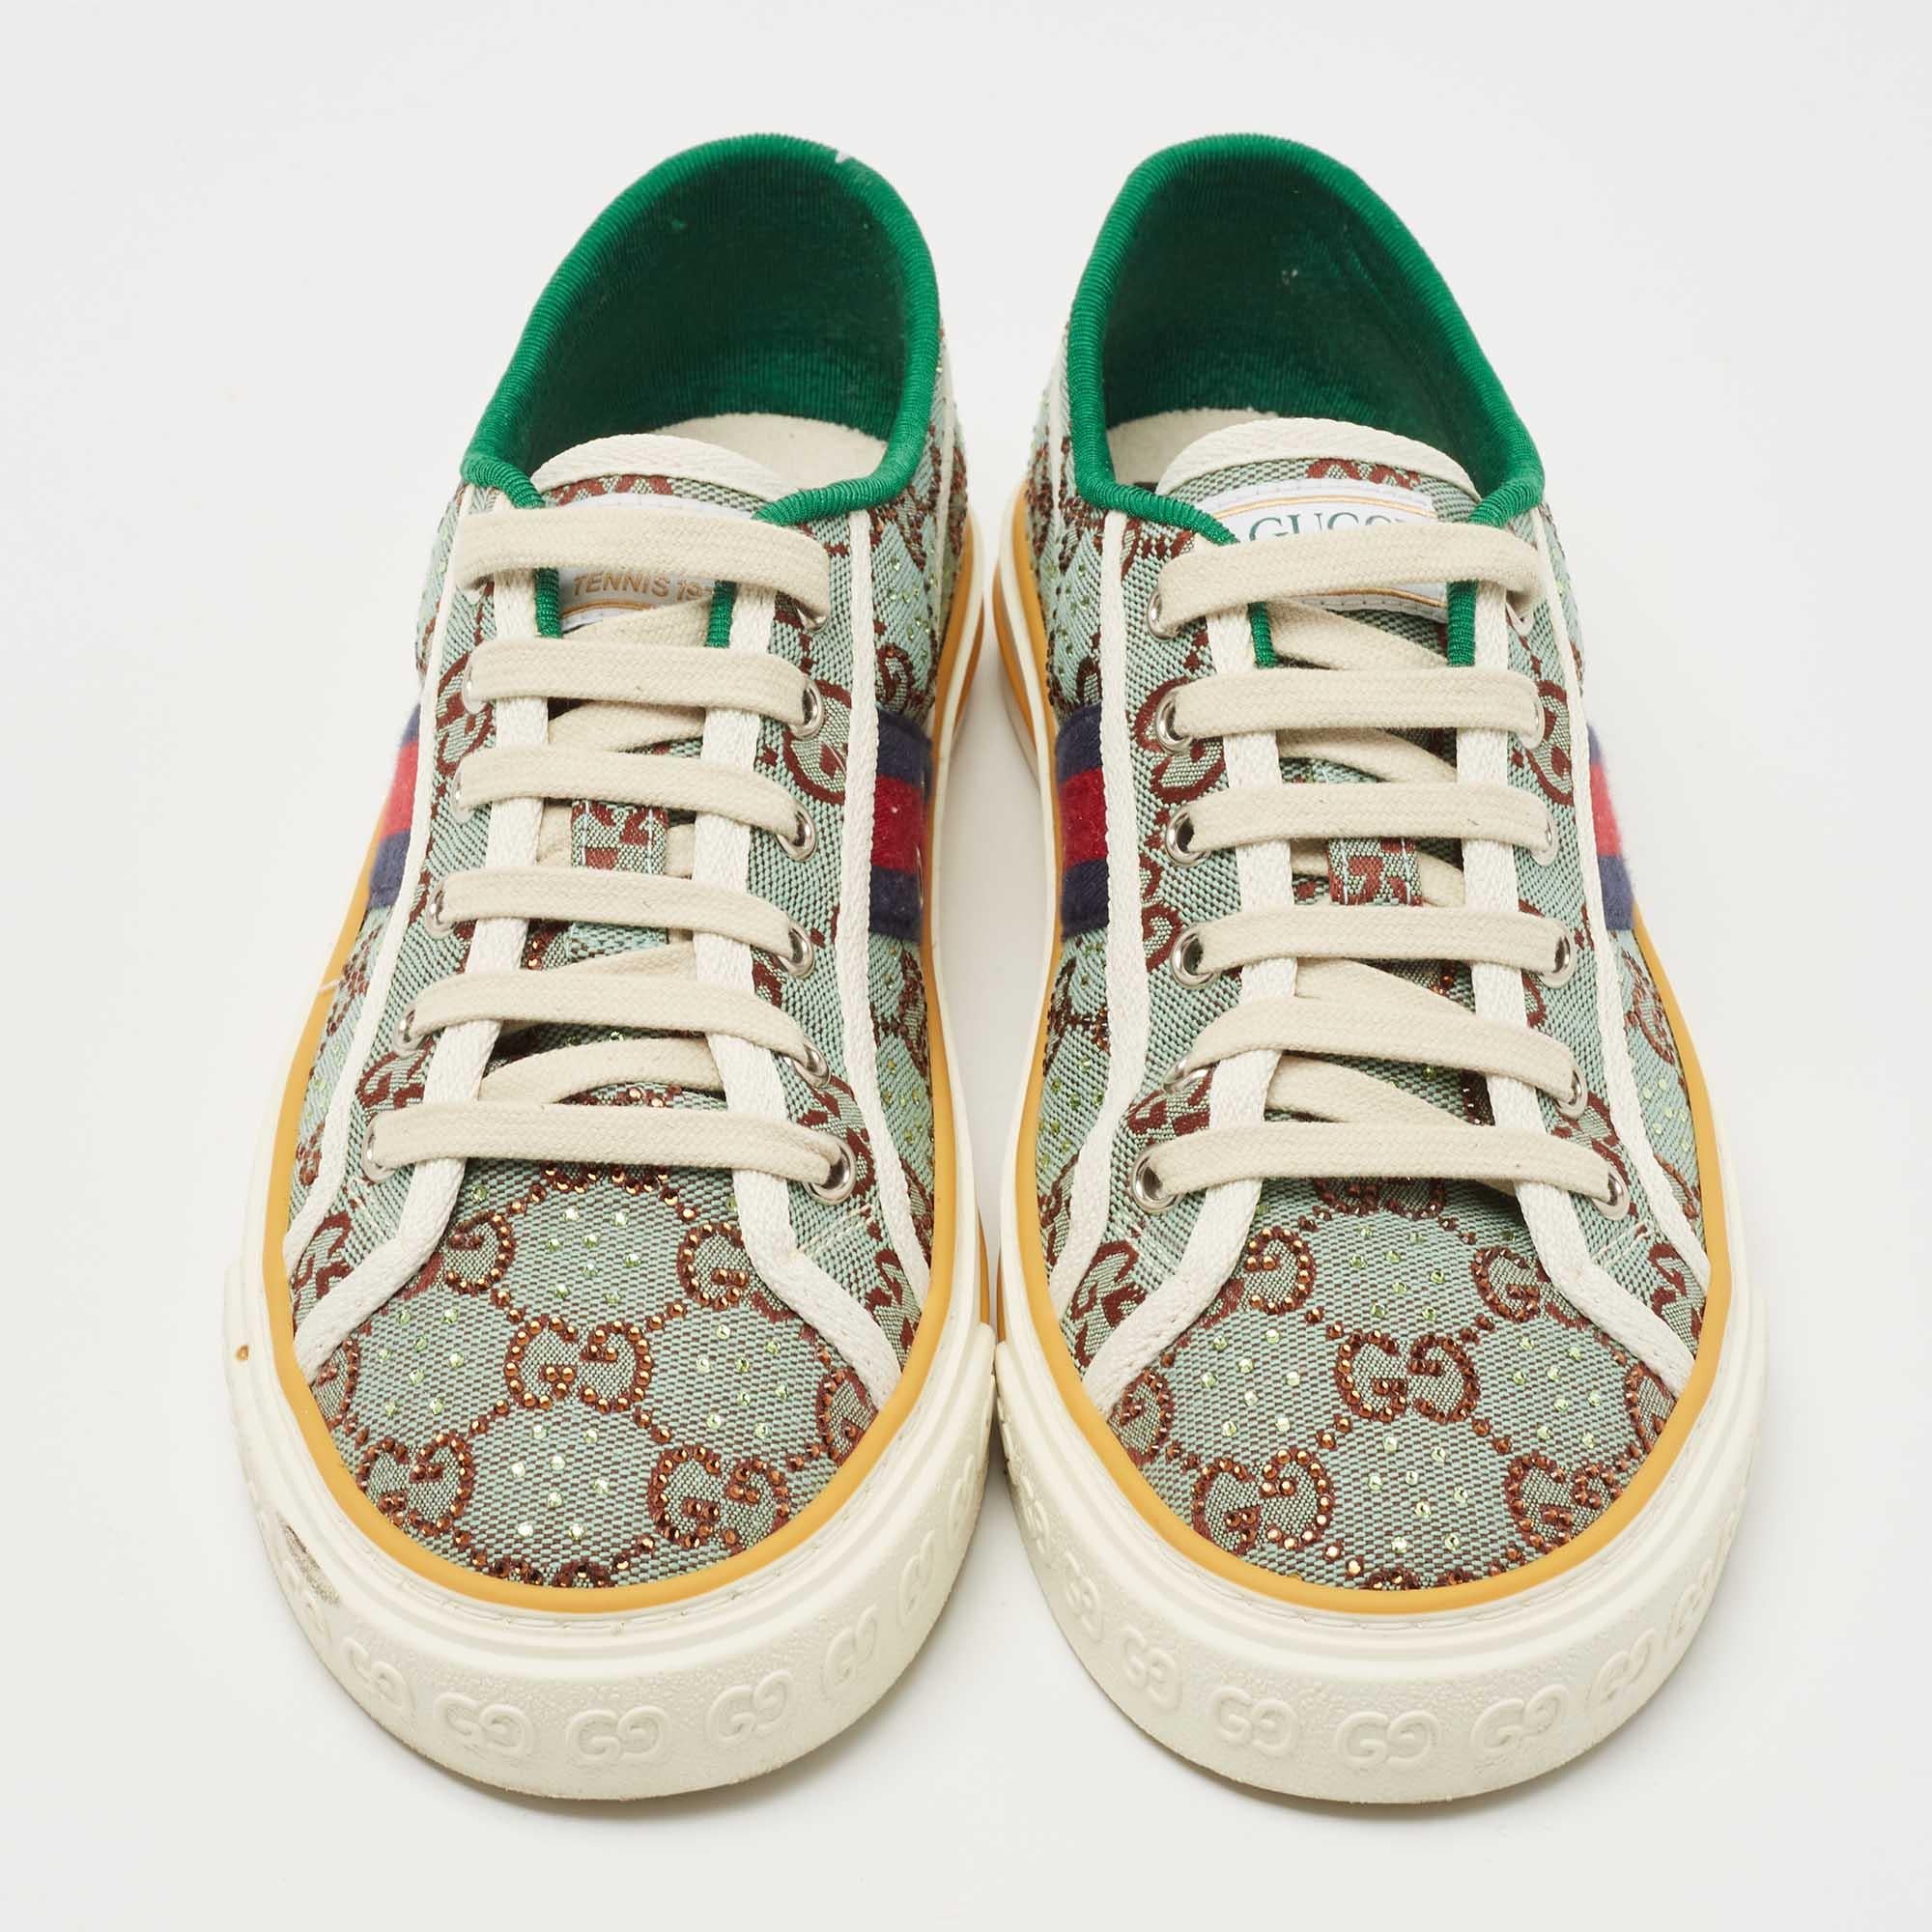 Give your outfit a chic update with this pair of designer sneakers. The creation is sewn perfectly to help you make a statement in them for a long time.

